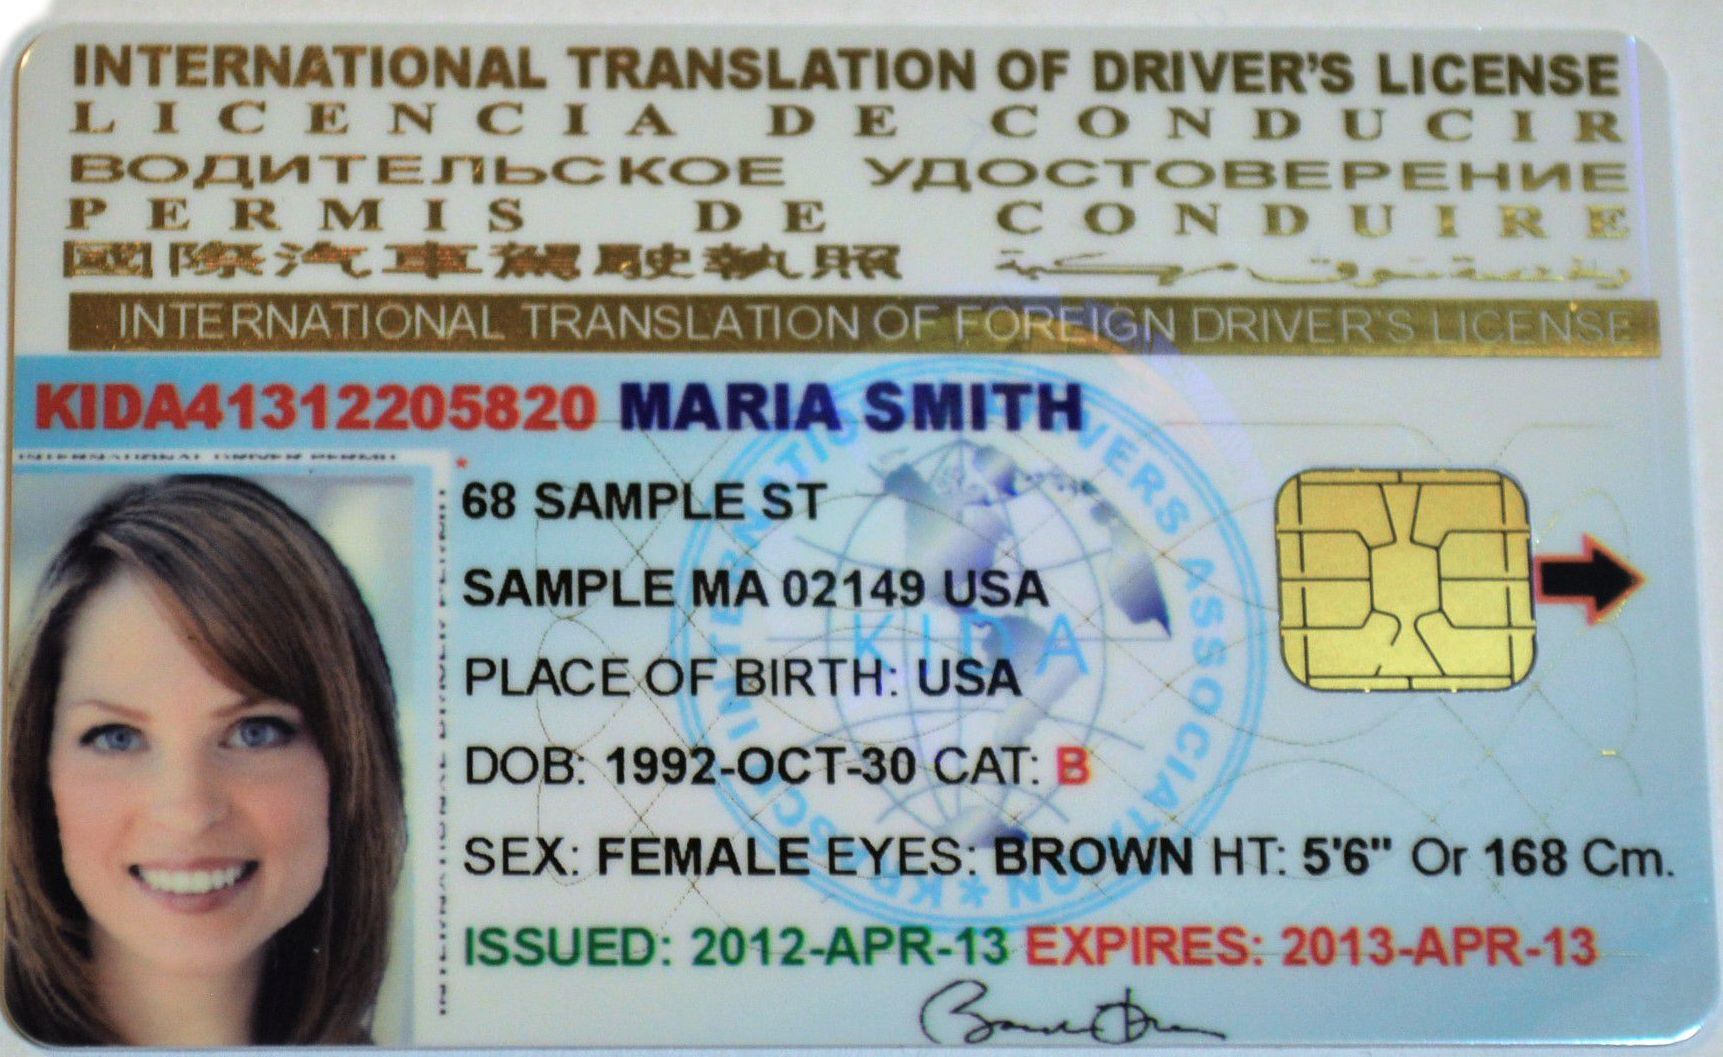 do you need a driver's license to travel internationally